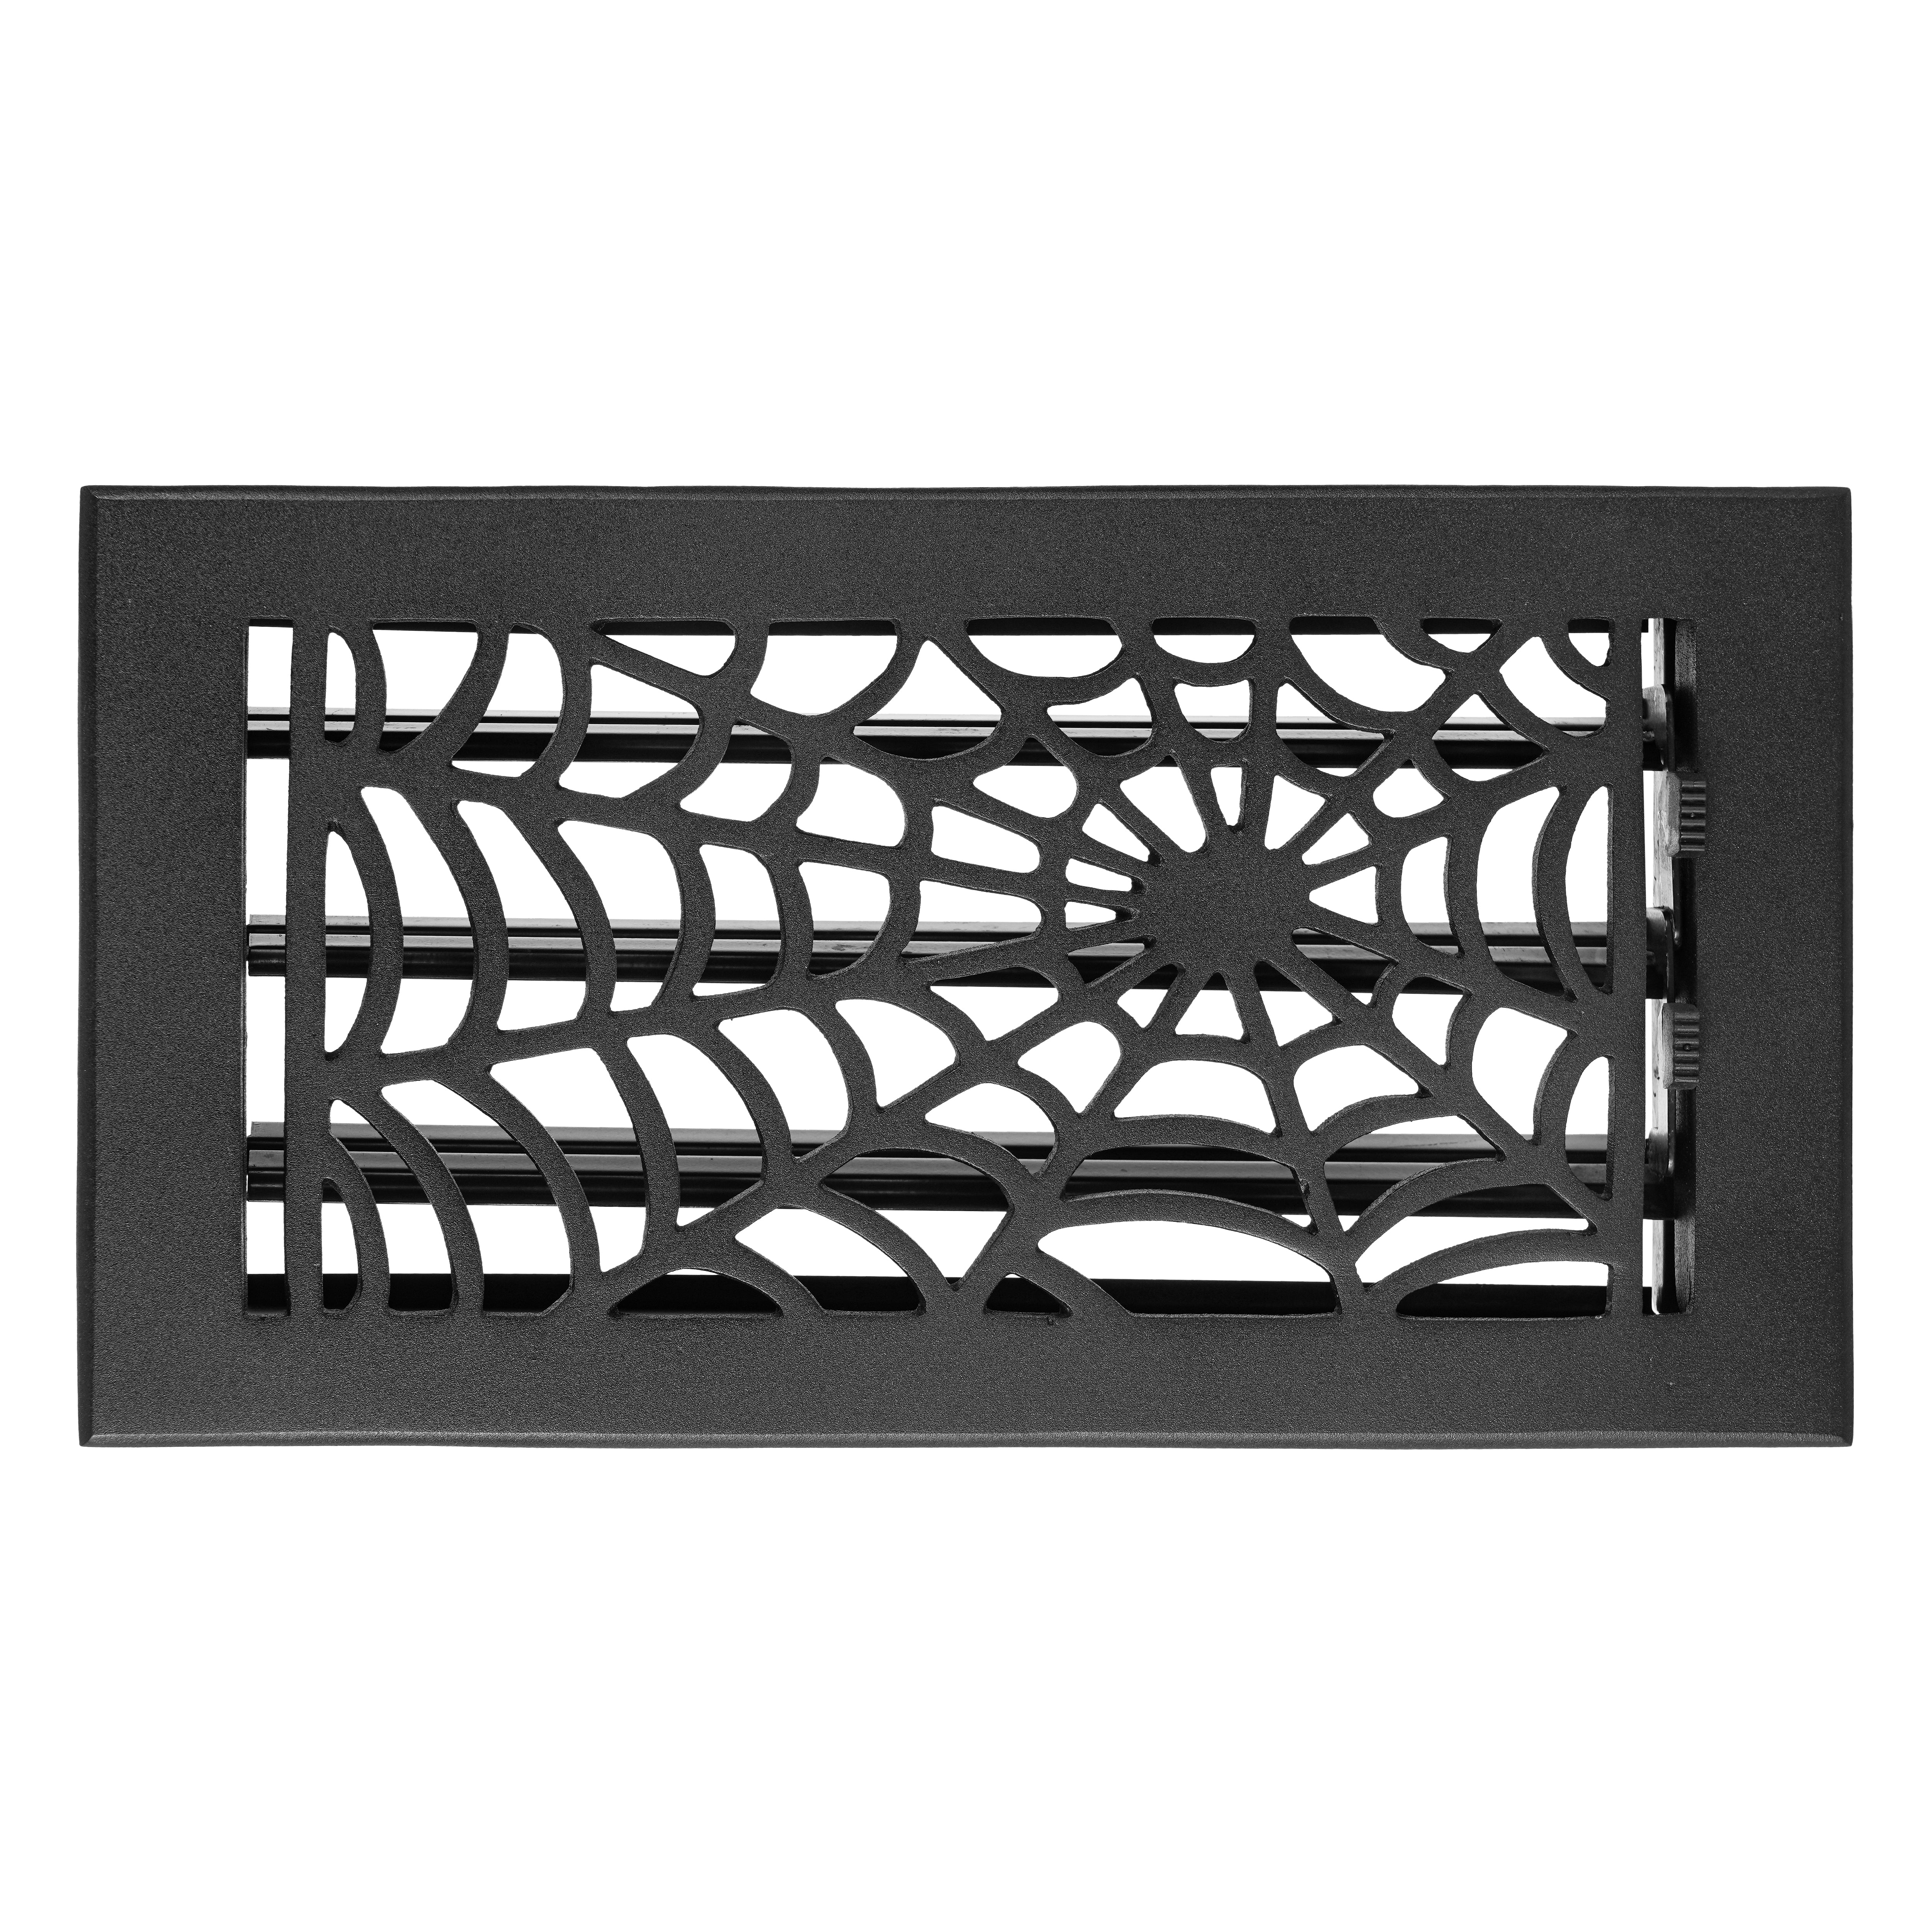 Spooky Gothic Vent cover 6"x 12" Duct Opening (Overall 7-1/2"x 13-3/4") in Spider Web Design | Solid Cast Aluminium Register Cover | Powder Coated